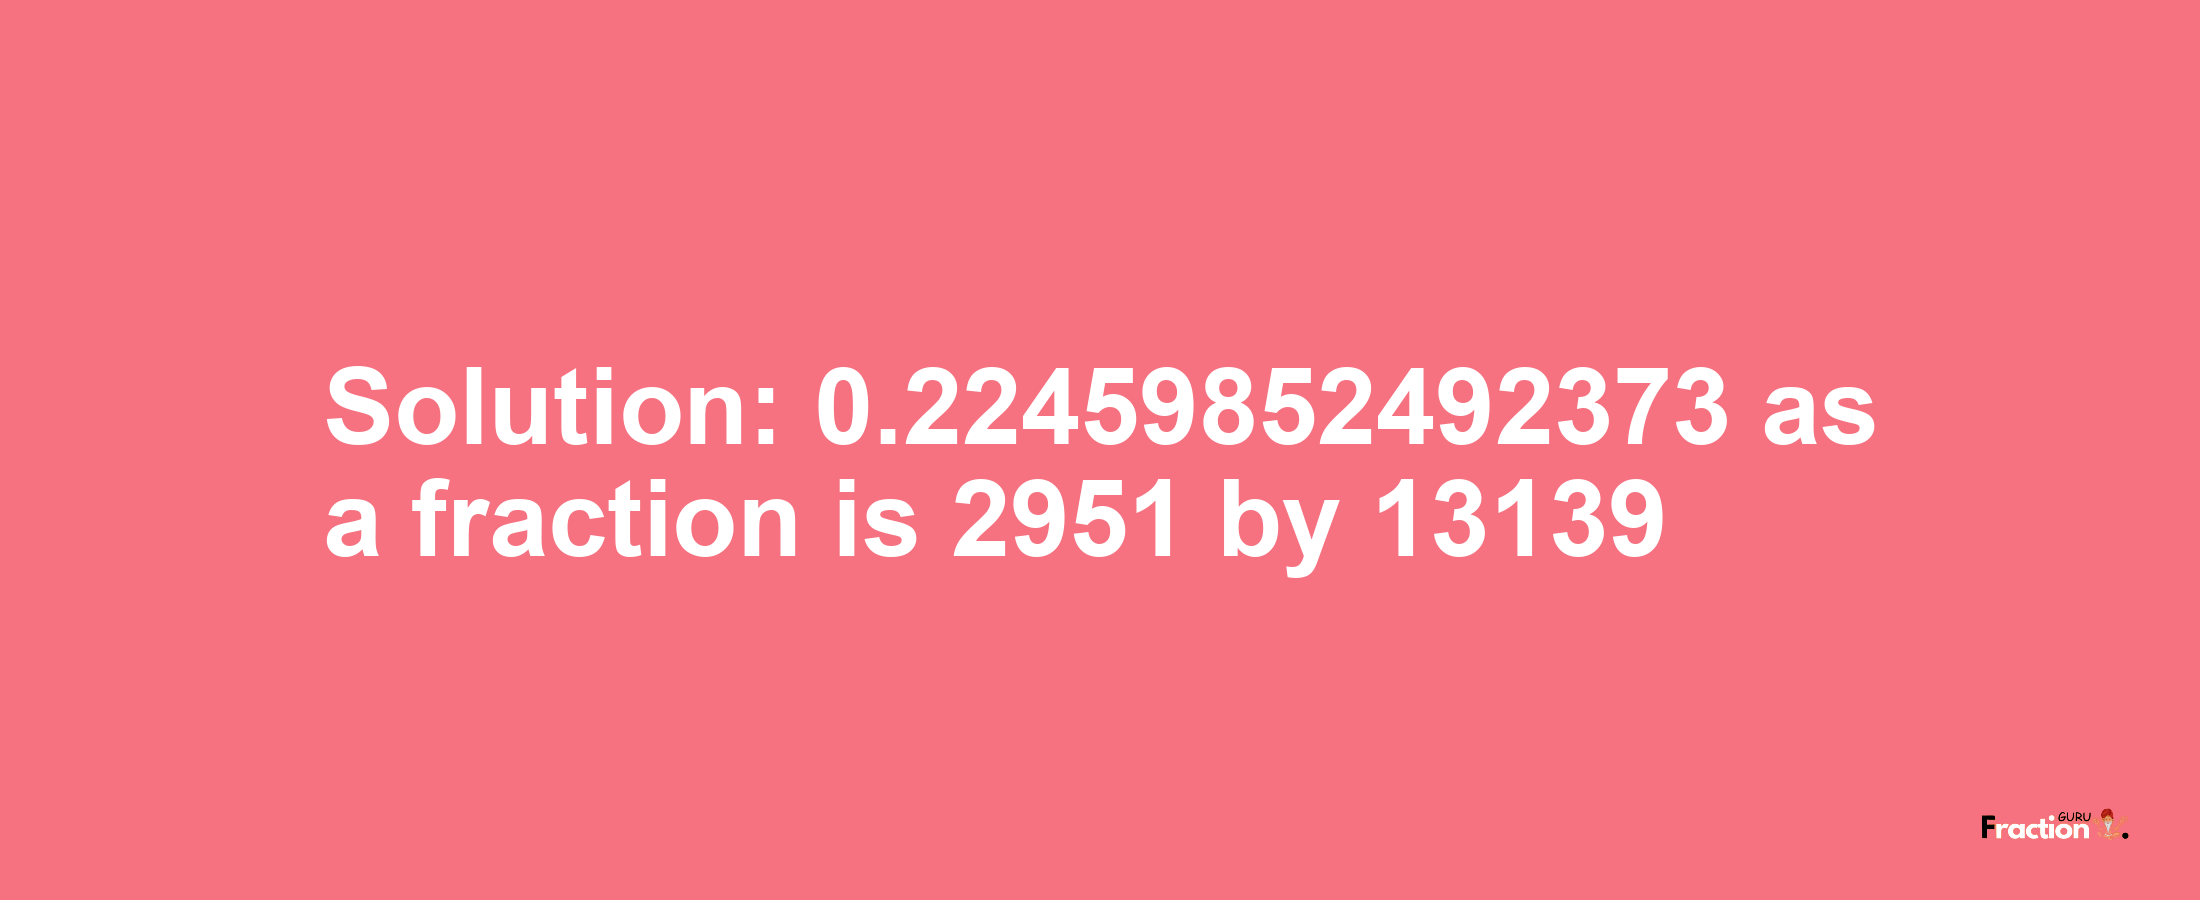 Solution:0.22459852492373 as a fraction is 2951/13139